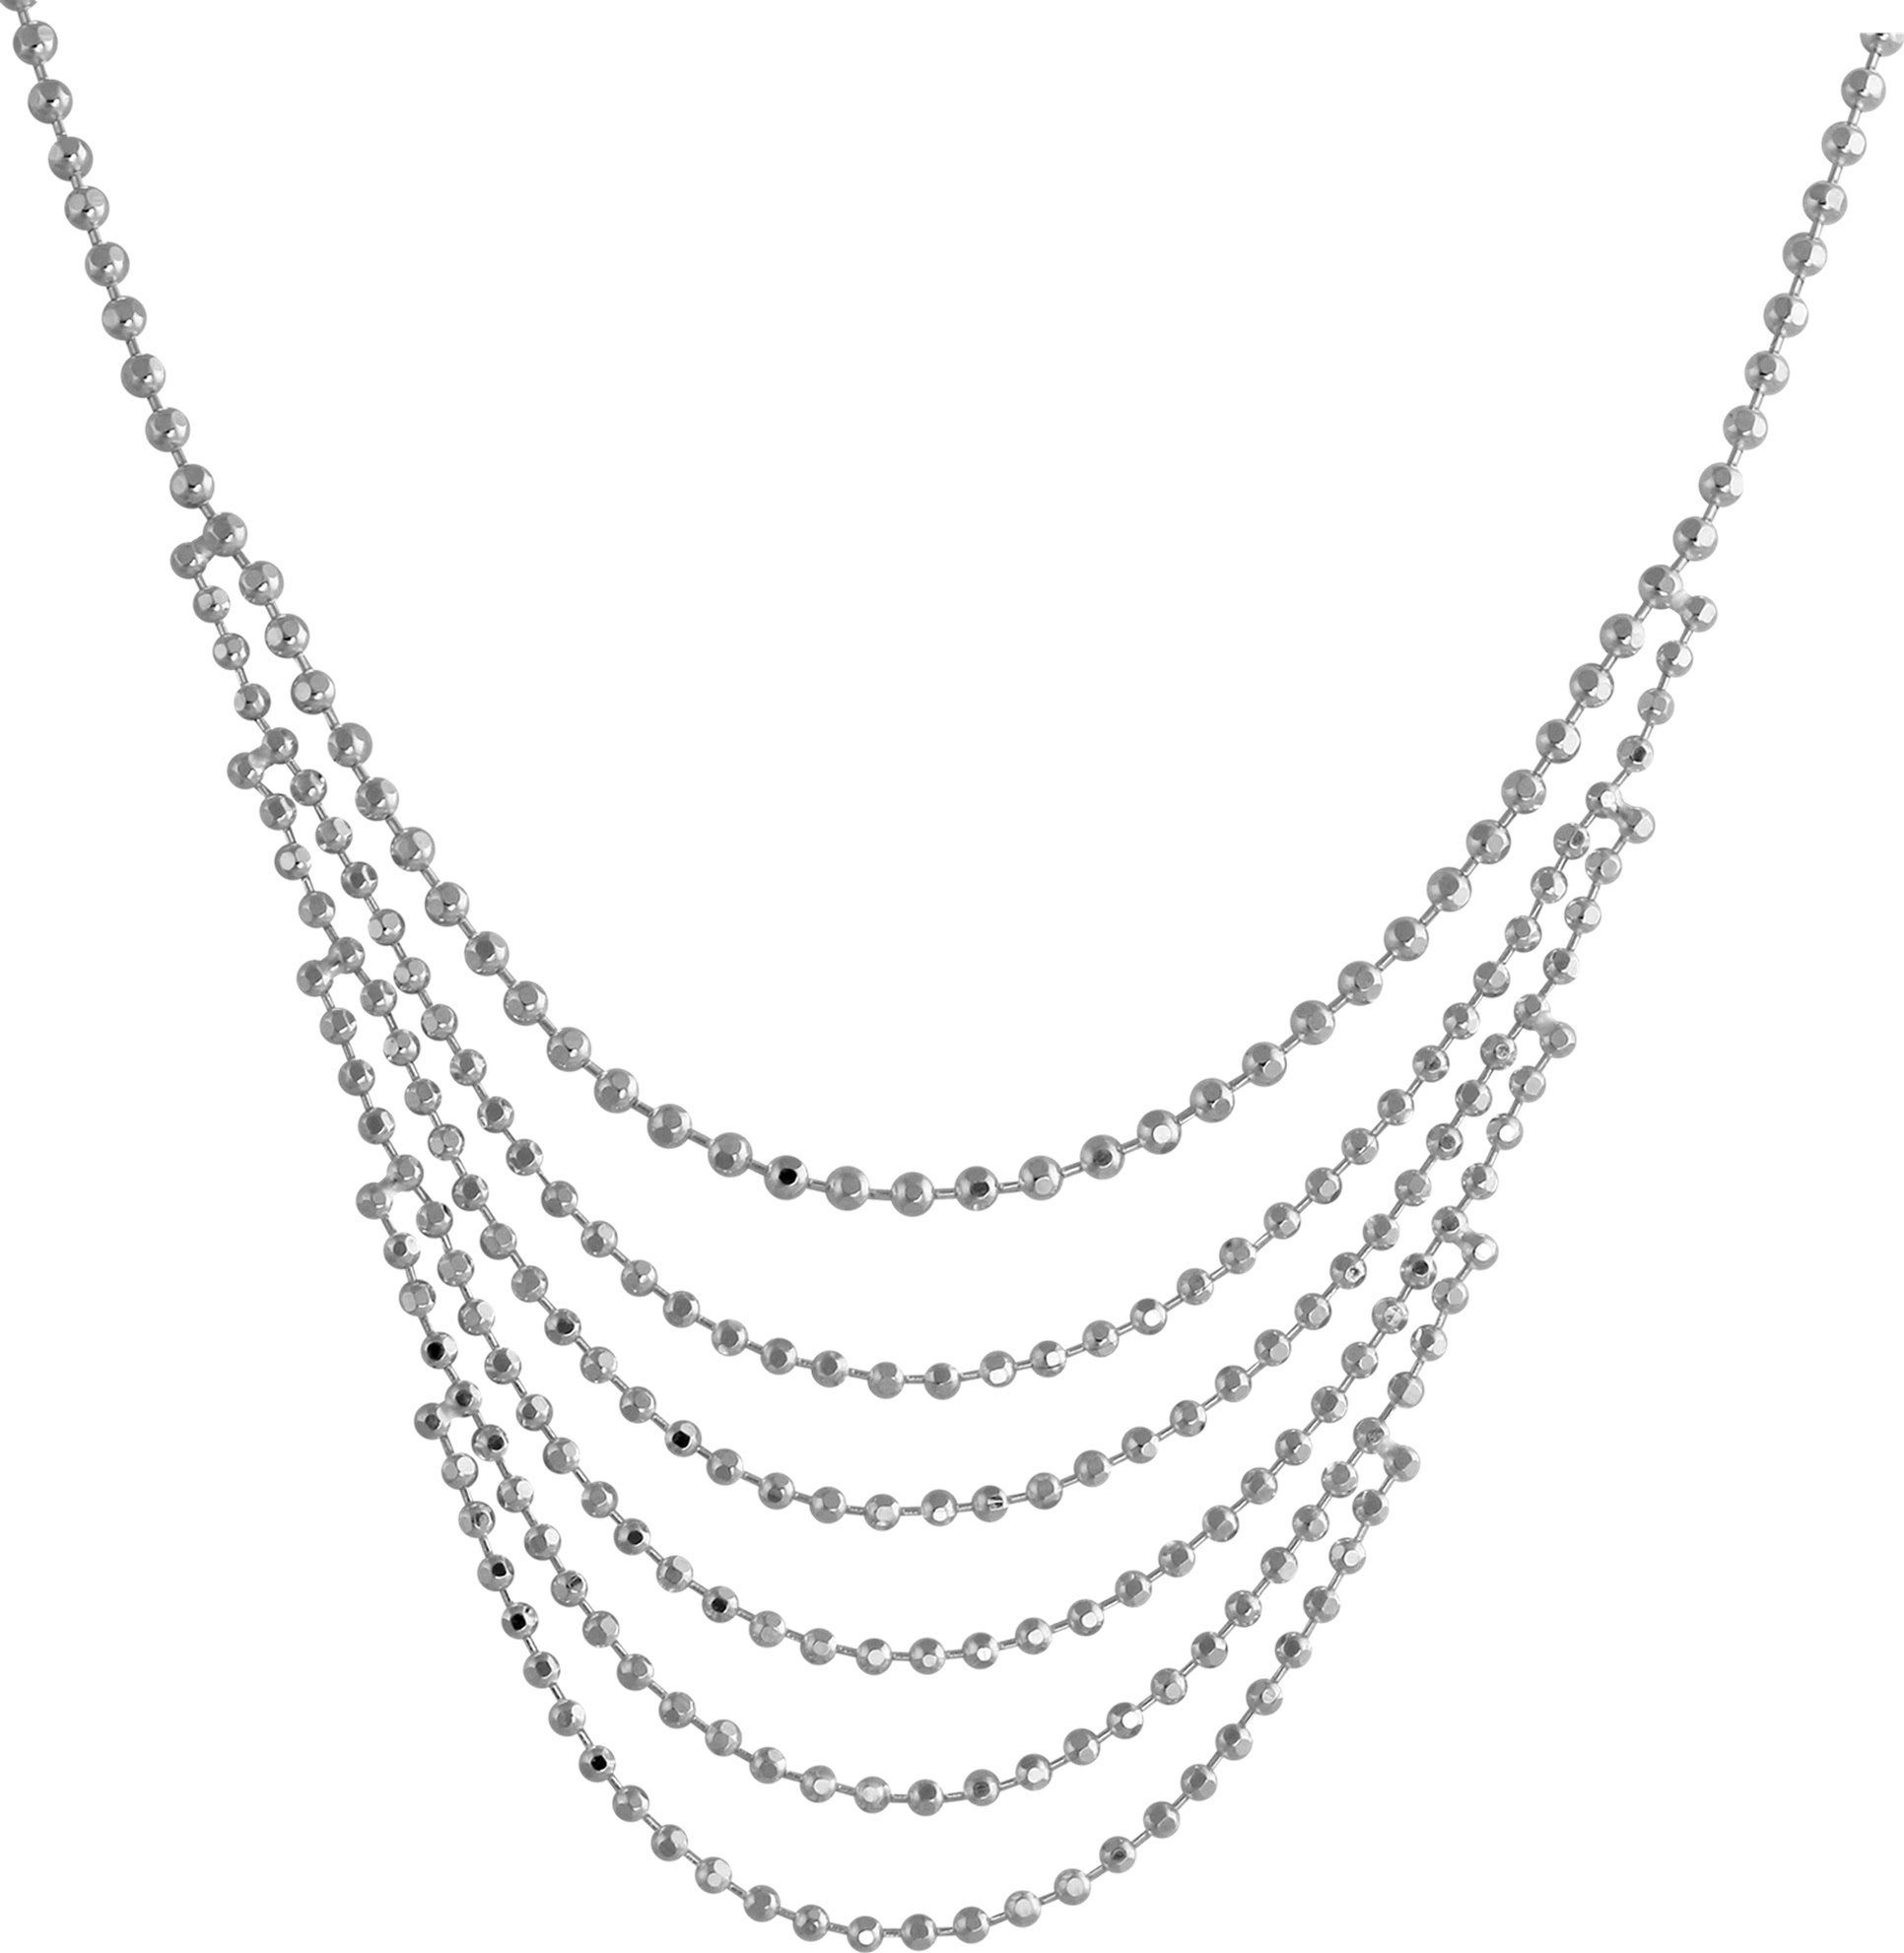 SilberDream Collier SilberDream Collier silber Damen Echt, Colliers ca. 42cm bis 47cm, 925 Sterling Silber, Farbe: silber, Made-I